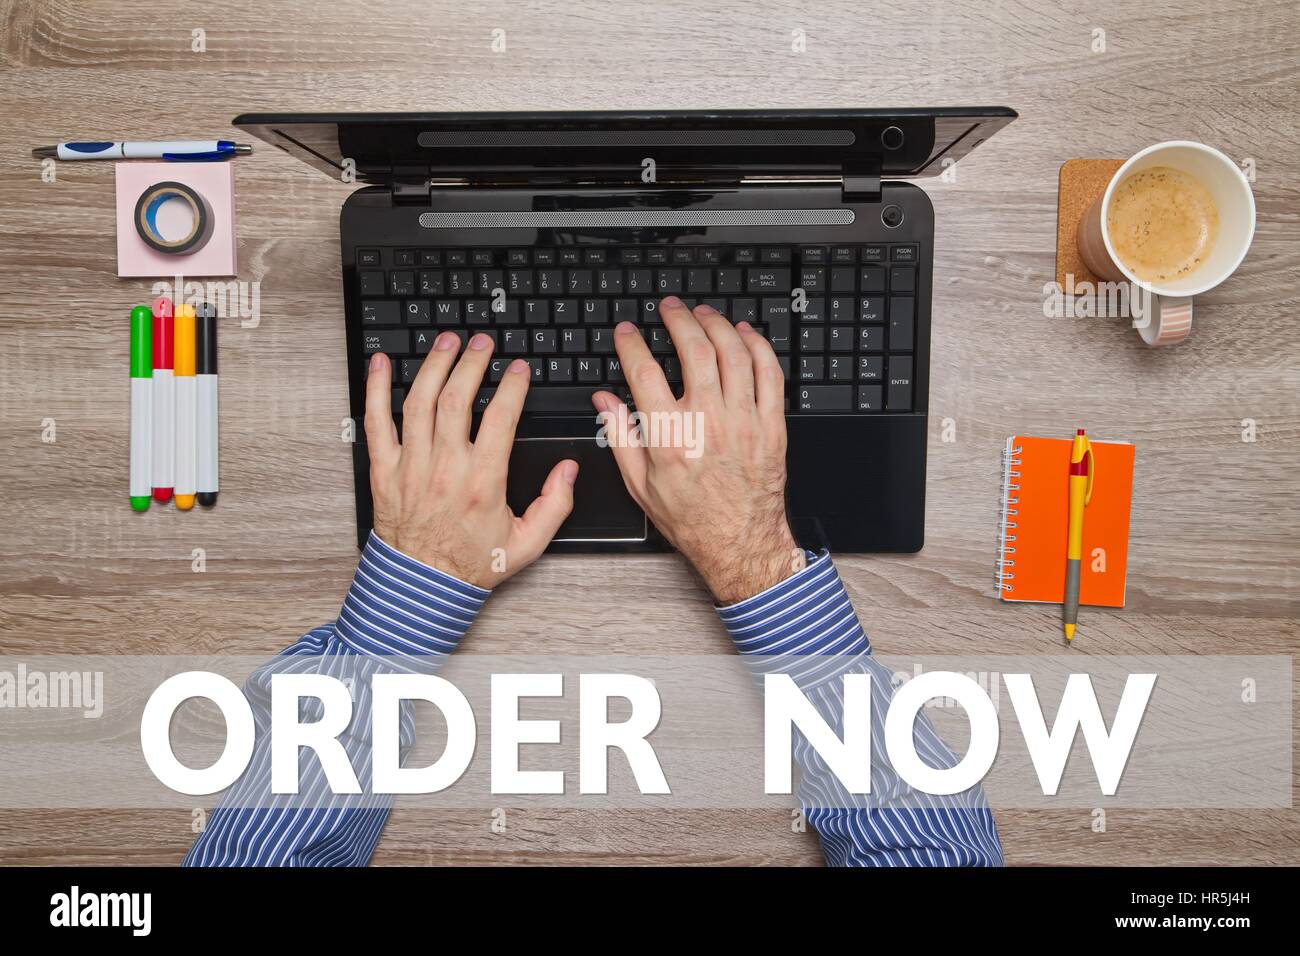 Male hand typing on laptop, message ORDER NOW Stock Photo